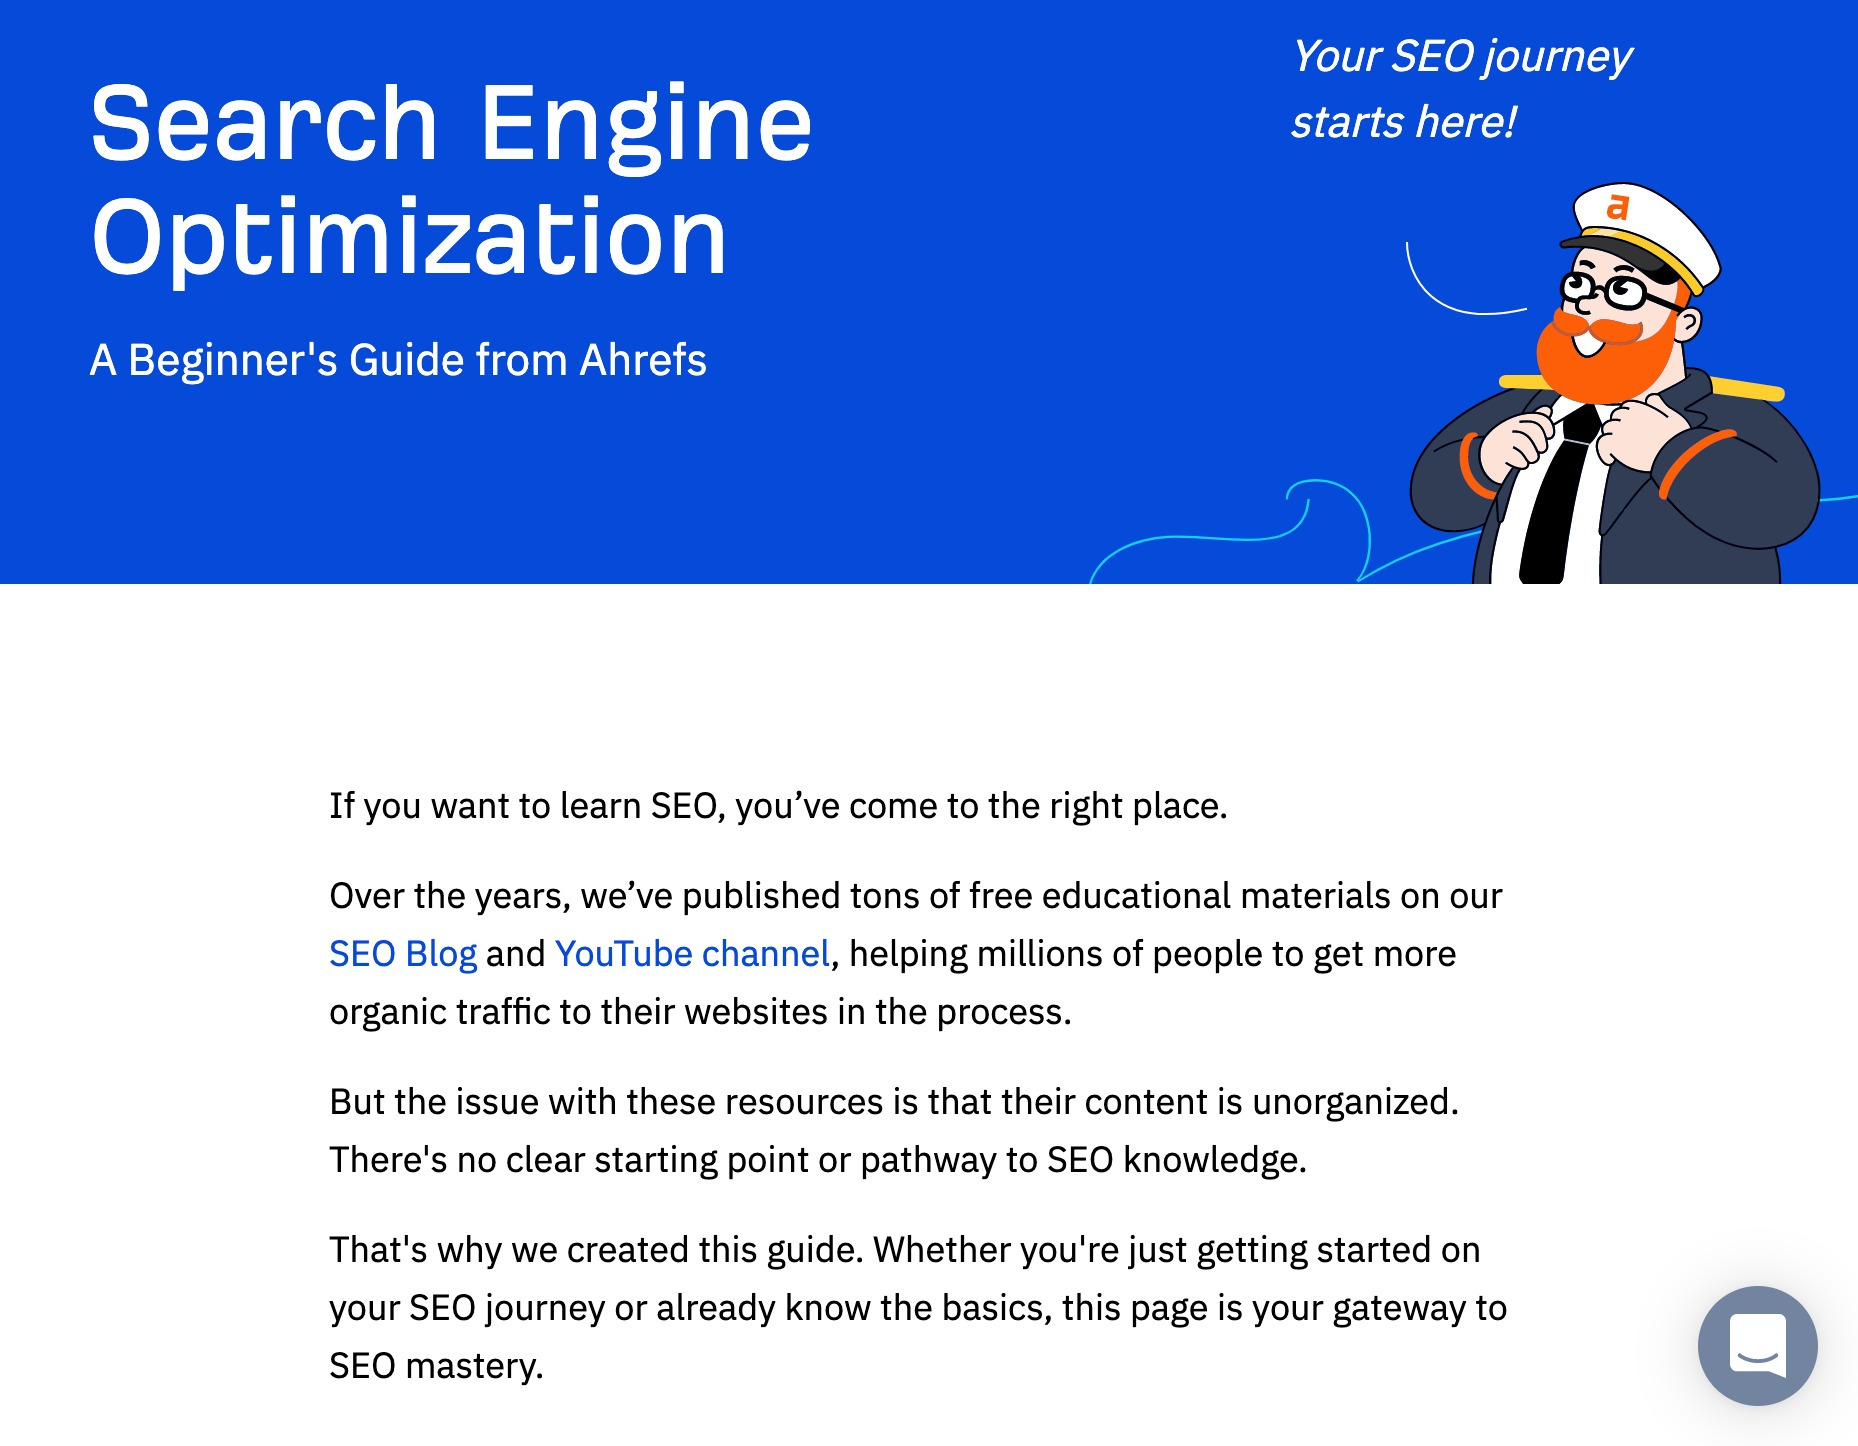 Excerpt of beginner's guide to SEO by Ahrefs